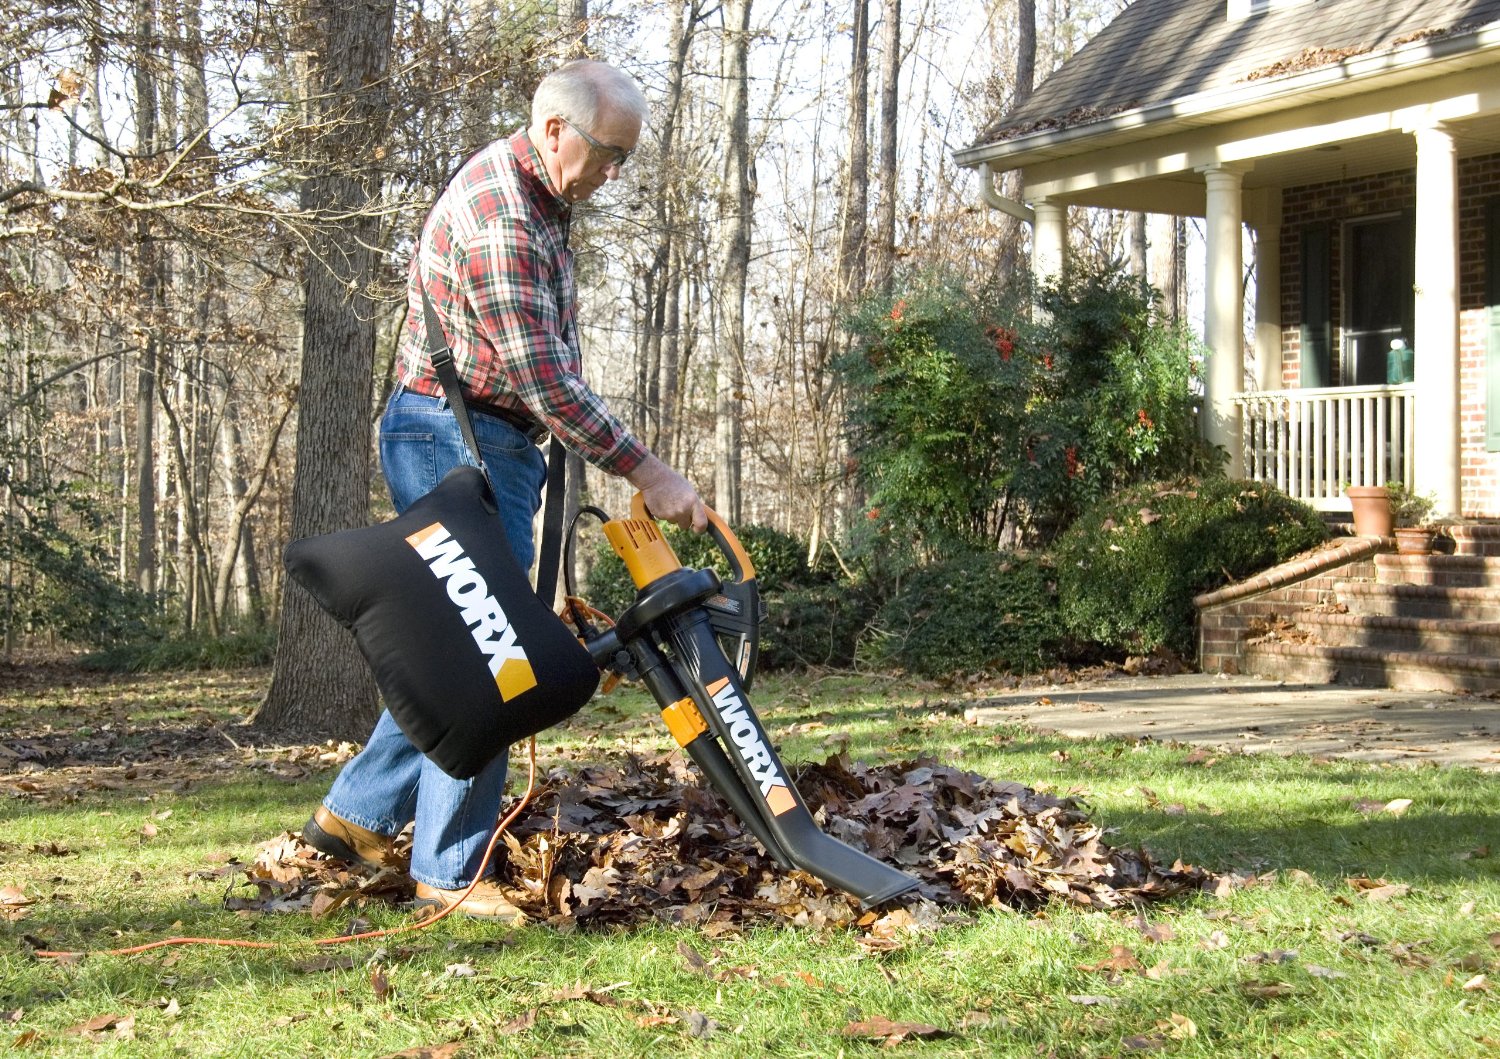 Green Deals: WORX 3-in-1 Electric TriVac Leaf Blower $65, more